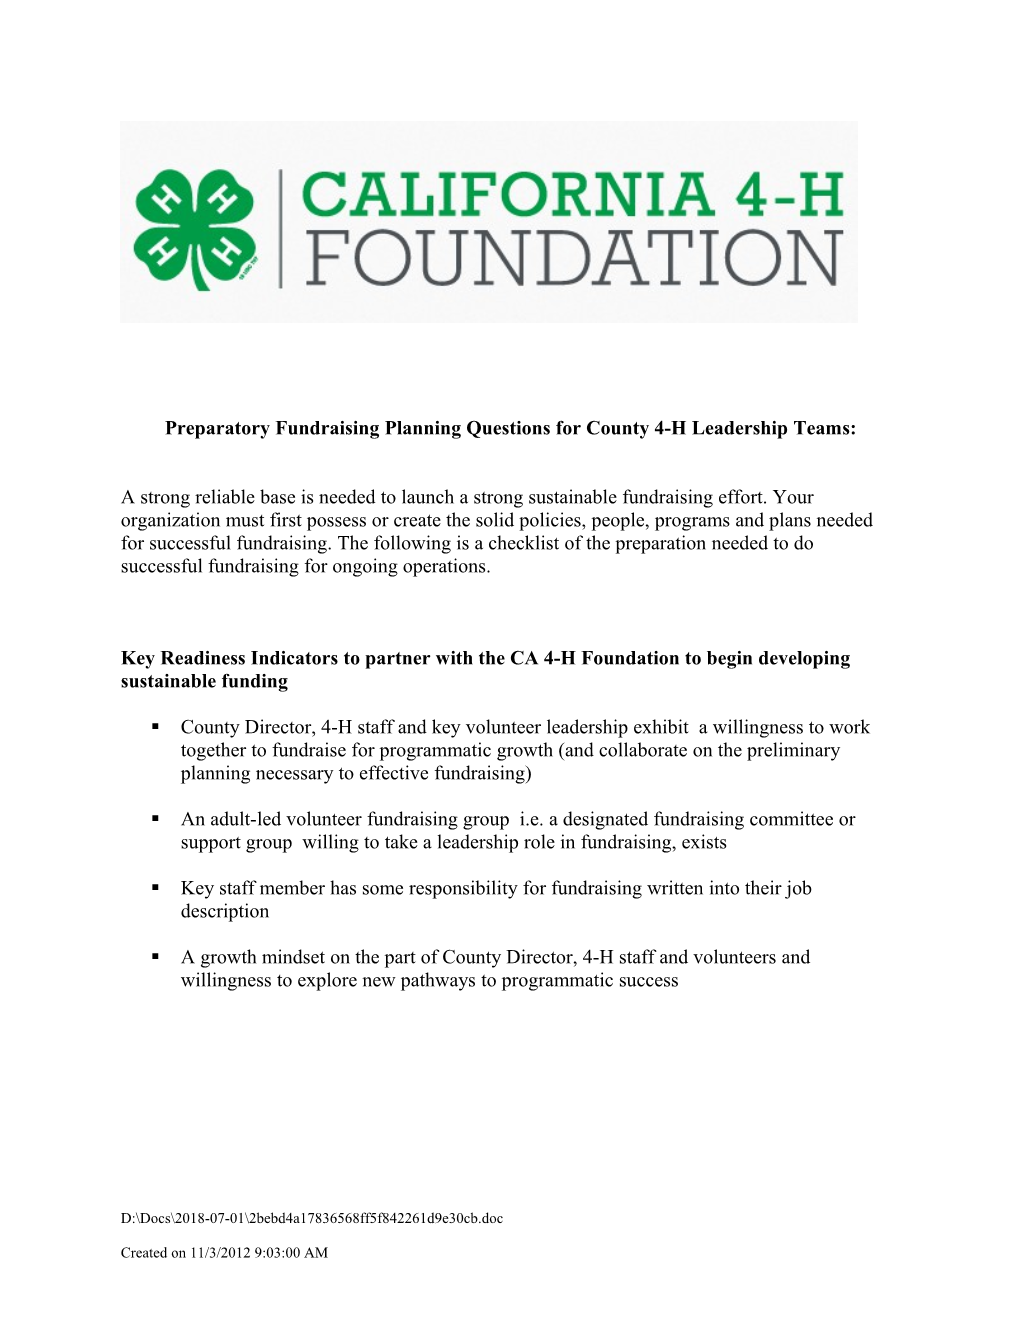 Preparatory Fundraising Planning Questions for County 4-H Leadership Teams